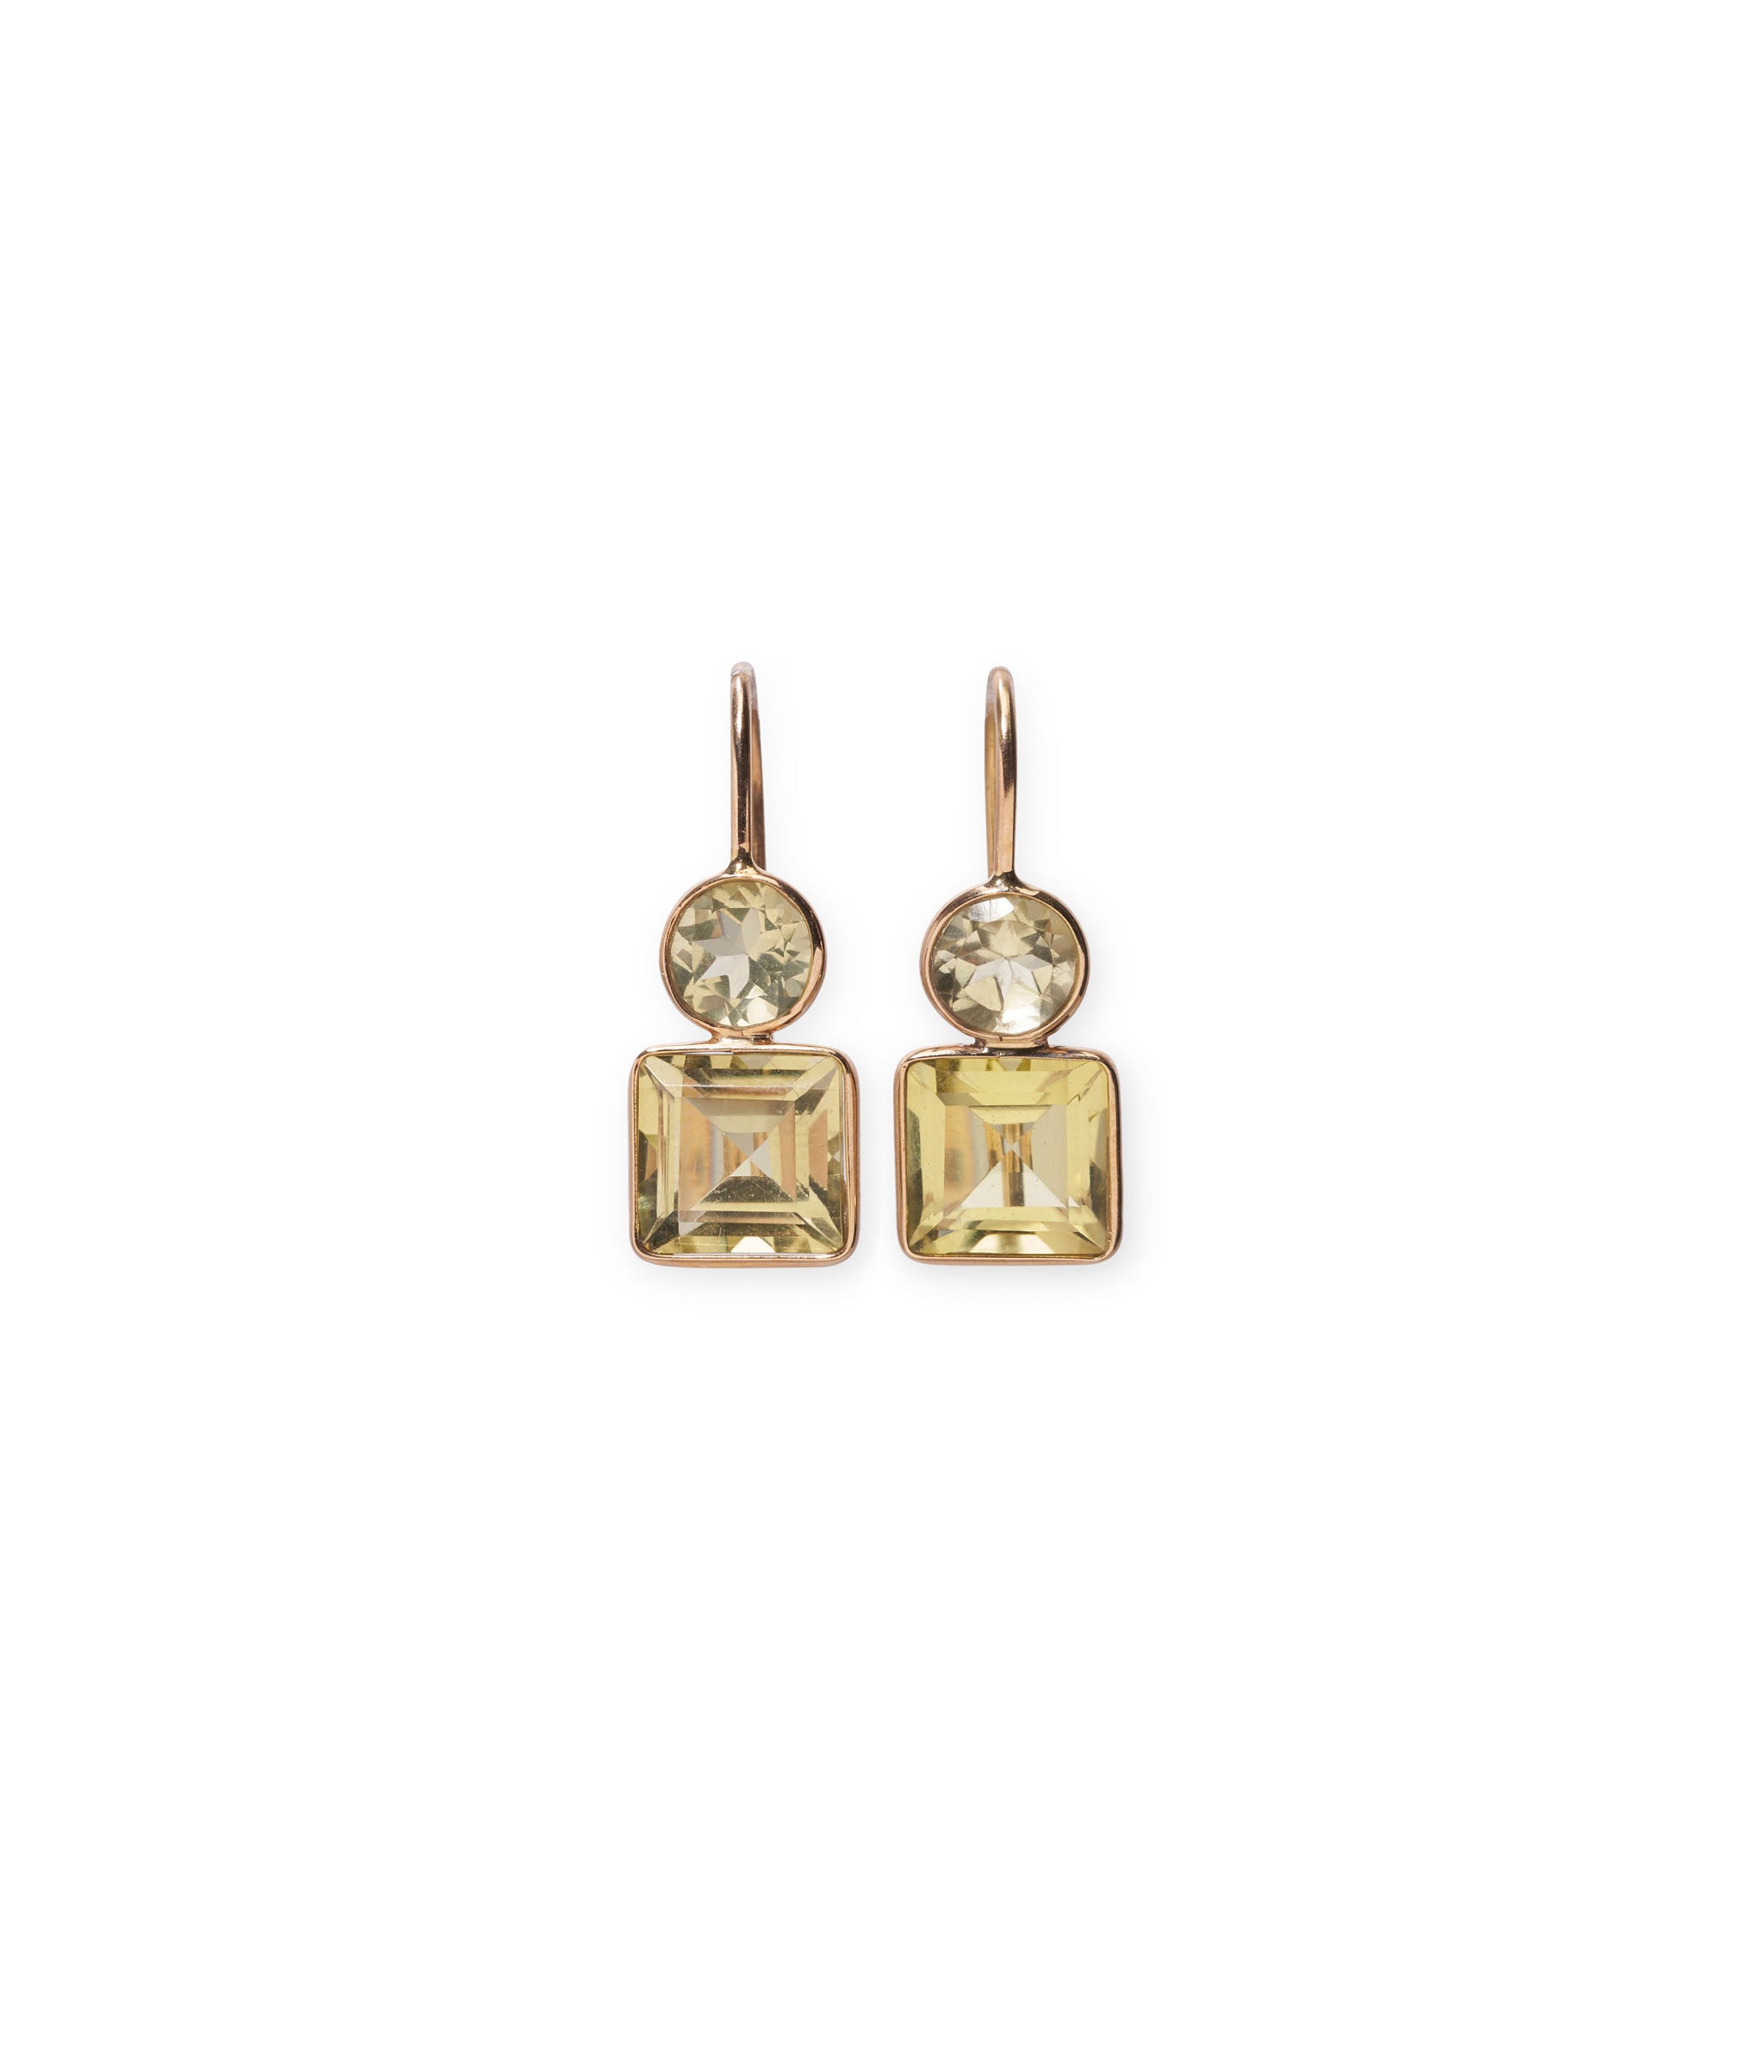 14k Pastille Earrings in Lemon Quartz. Fine gold earwires with faceted round and square yellow quartz stones.